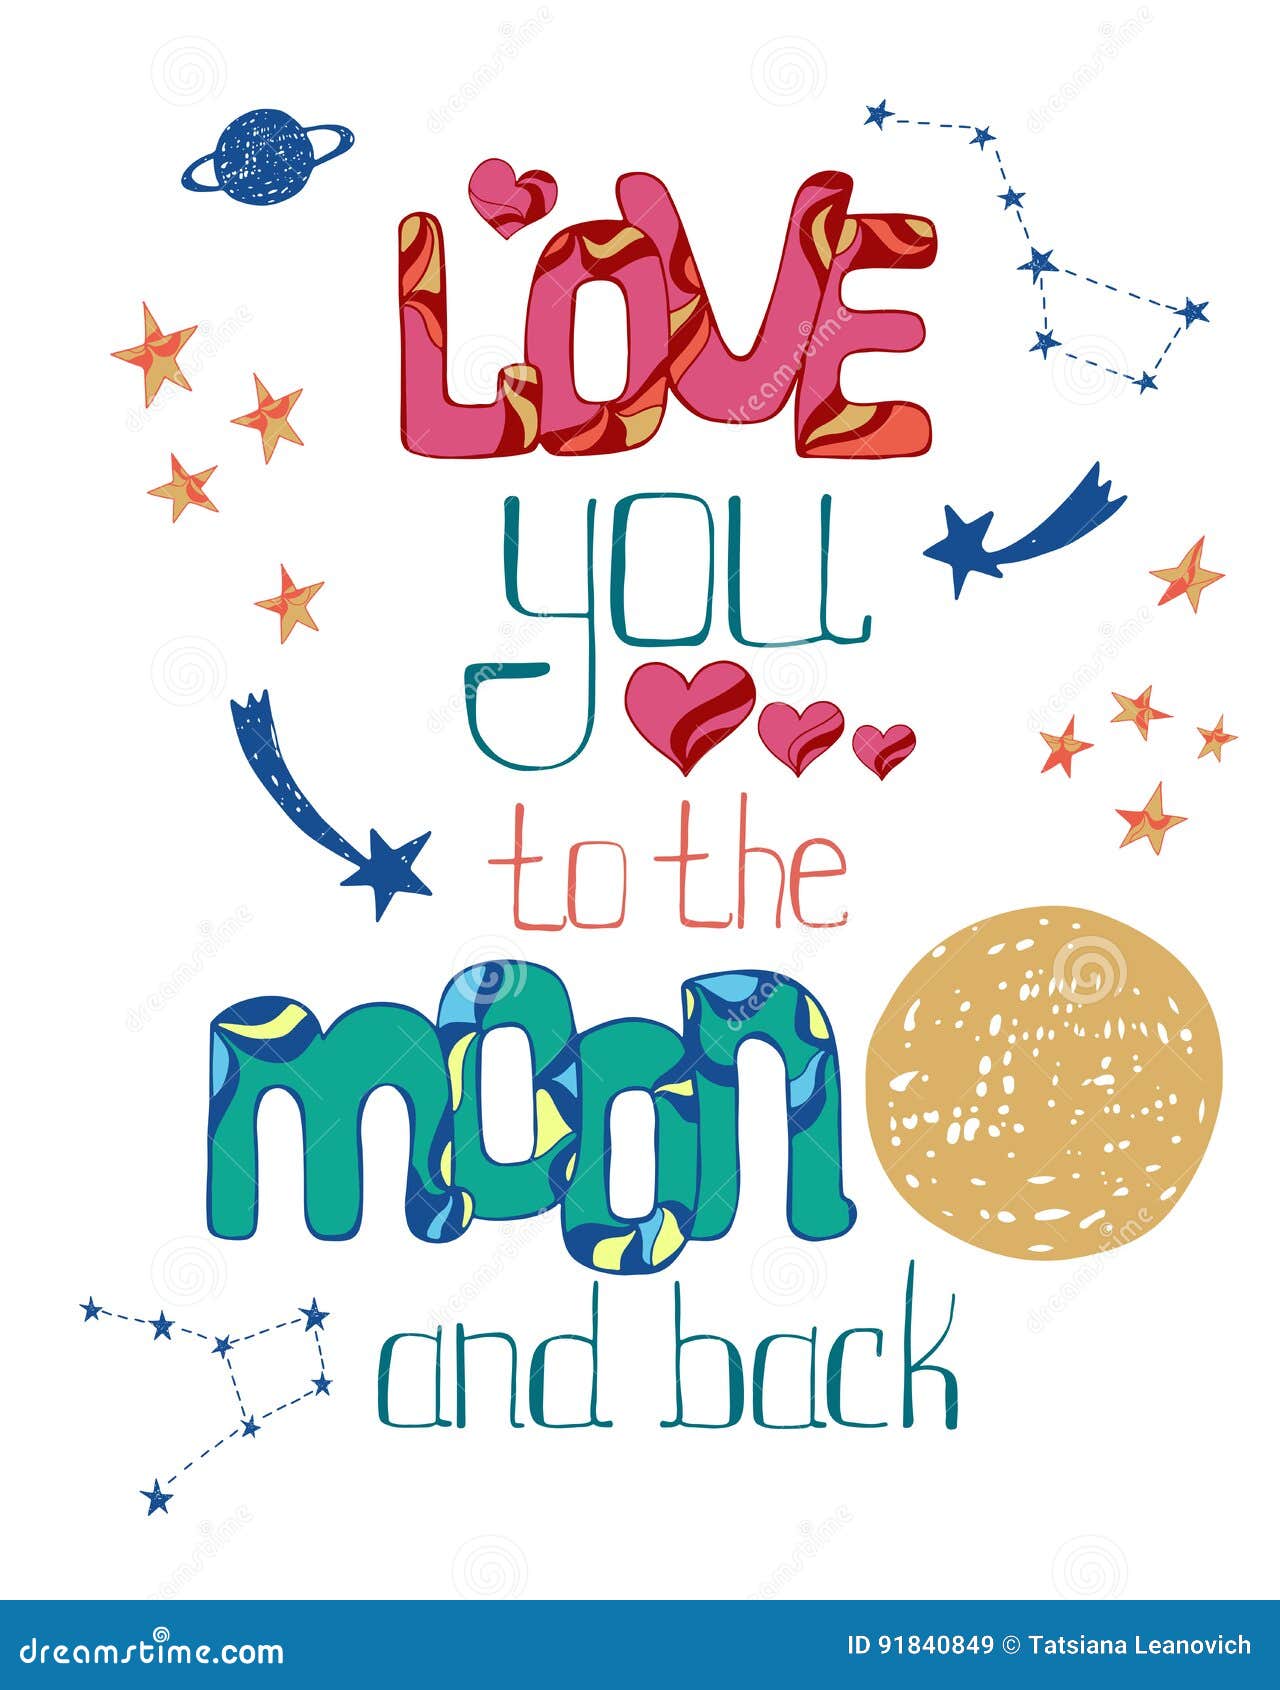 Love To the Moon Back. Hand Drawn Poster with a Romantic Illustration - Illustration of greeting, date: 91840849